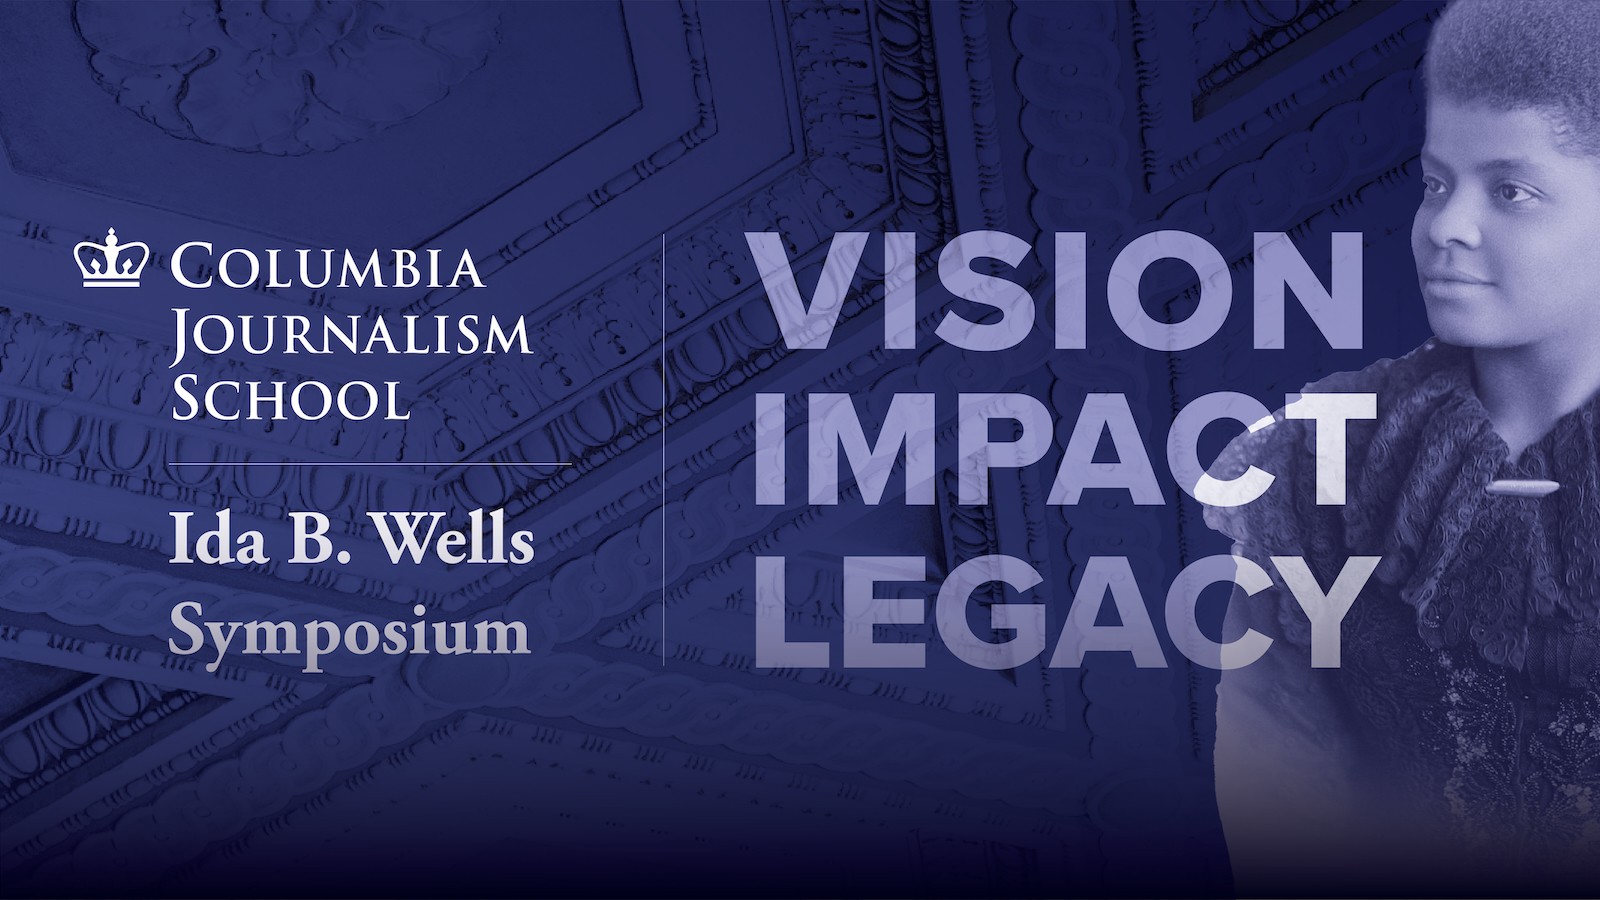 Header Image featuring Ida B. Wells and large text: "Vision, Impact, Legacy"